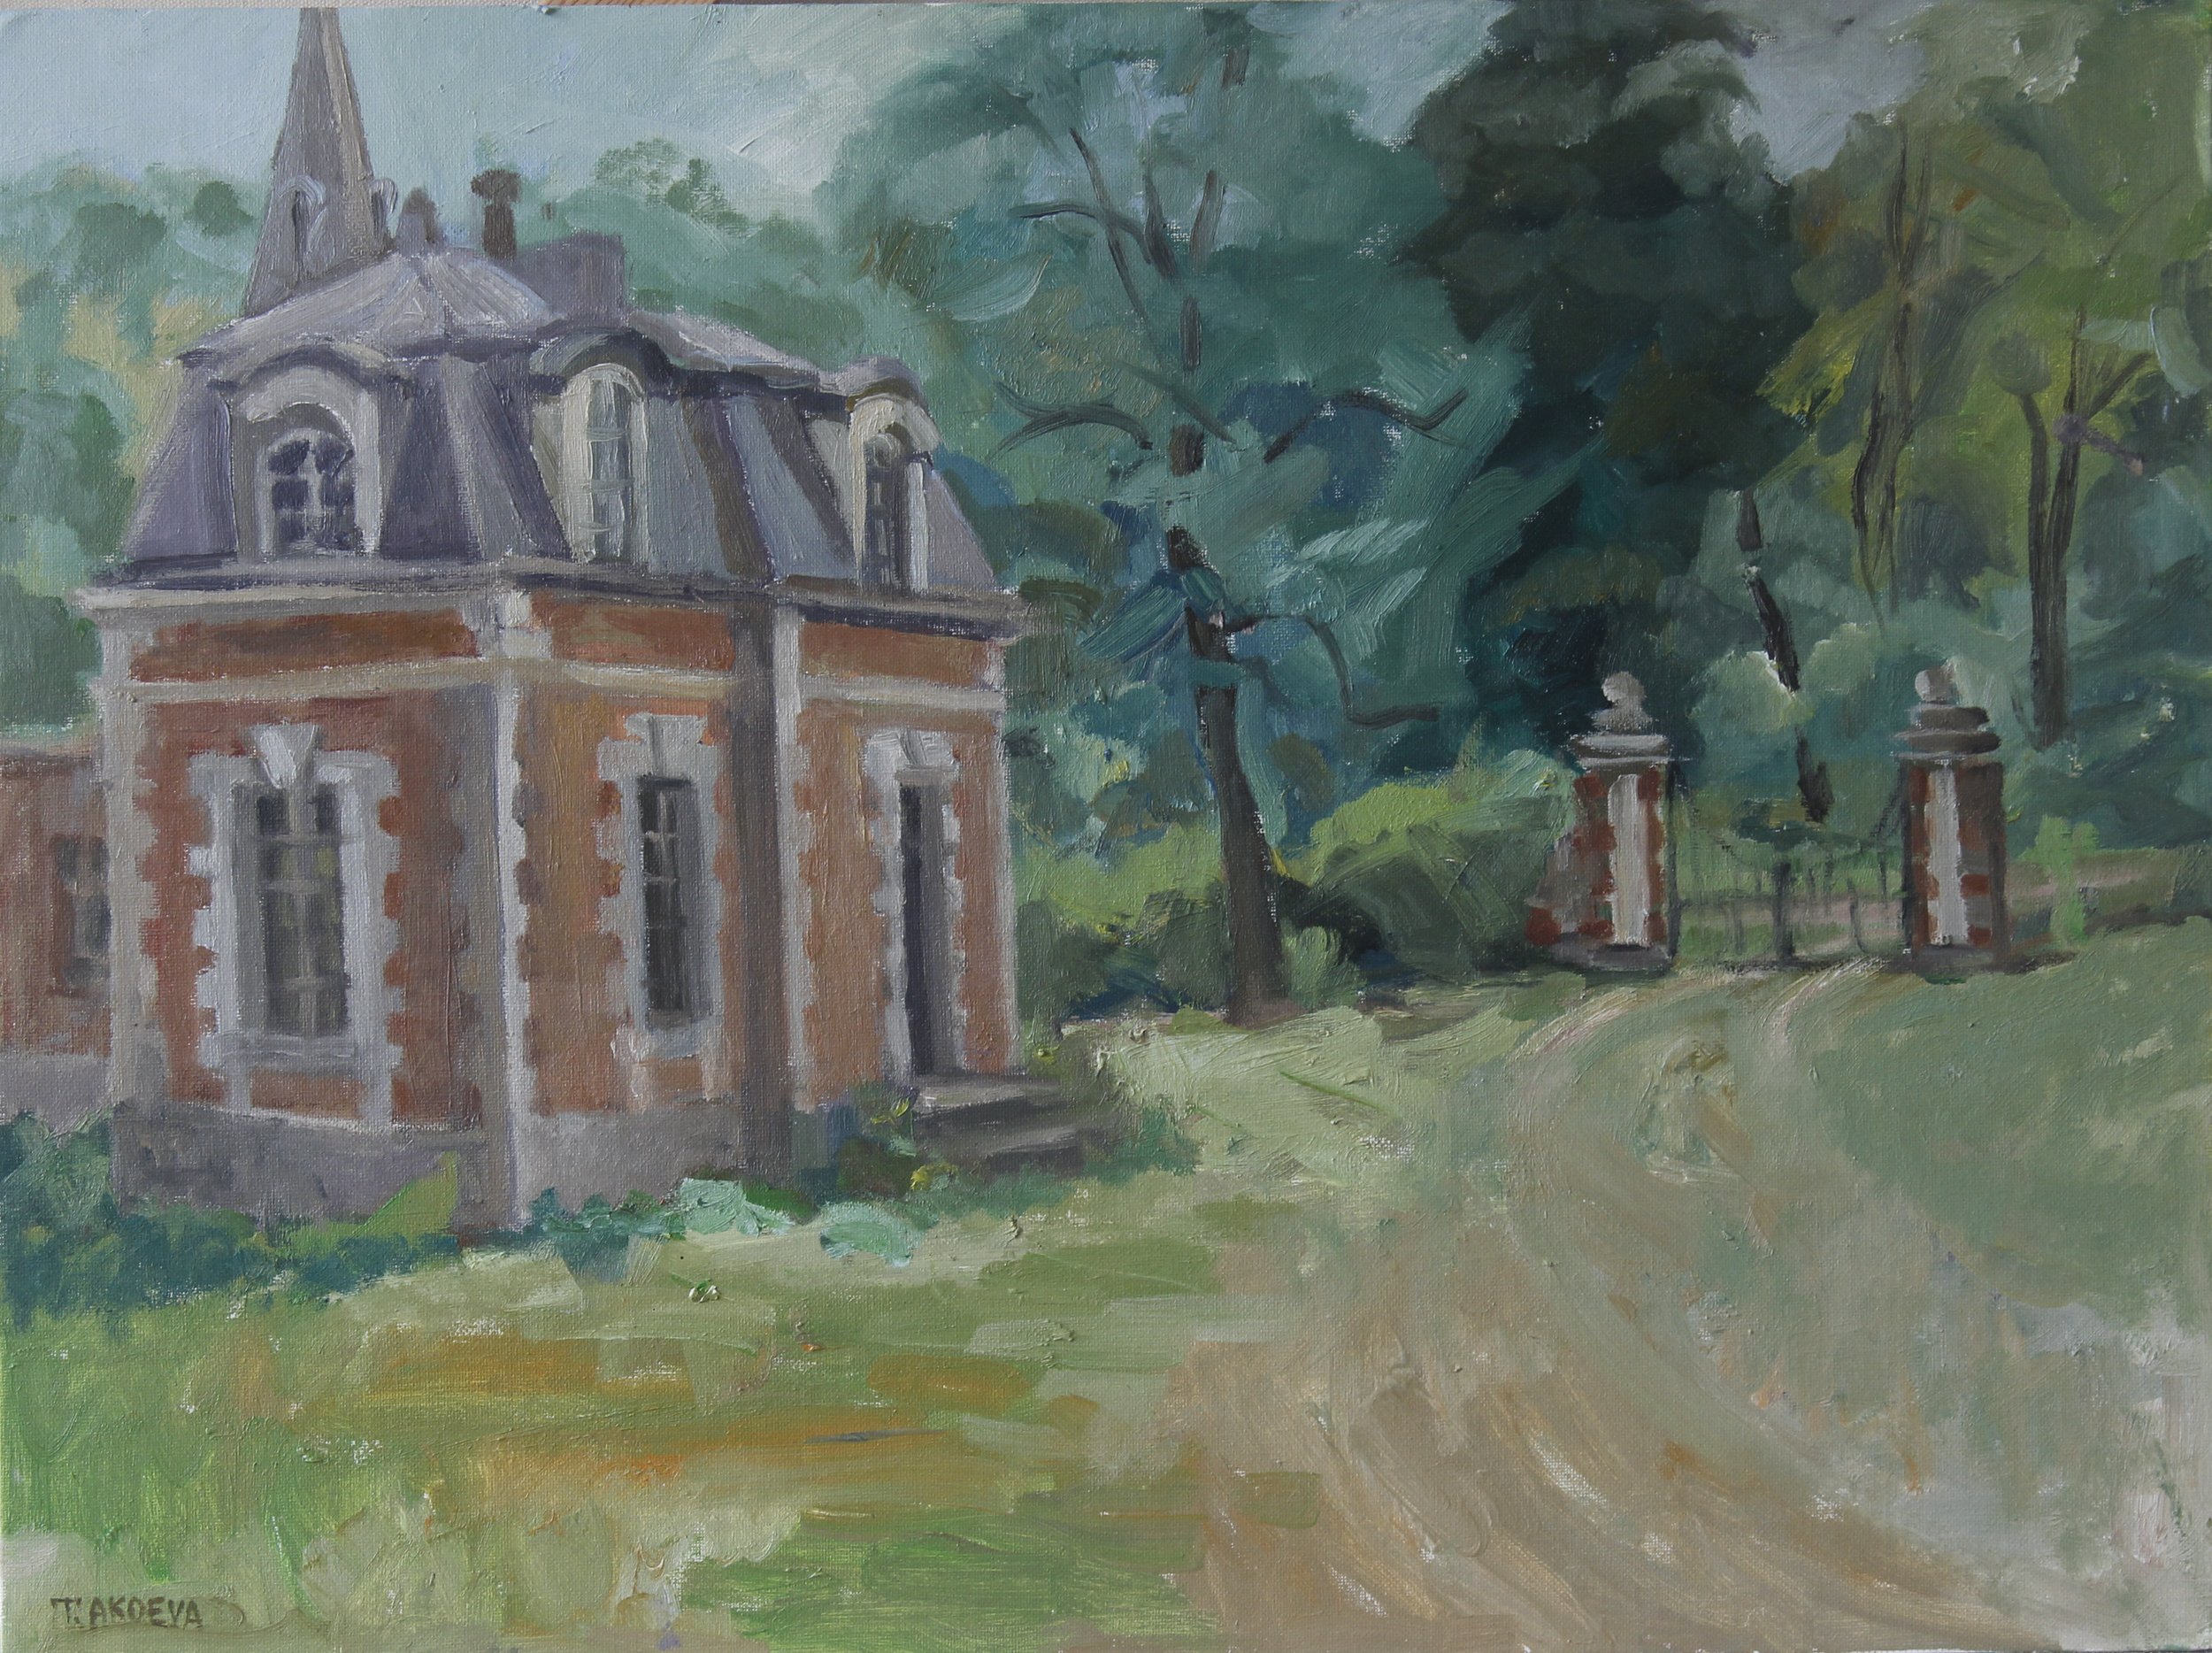 South Gatehouse at Chateau, France, 2023. Oil on canvas board, 16x20 inches.